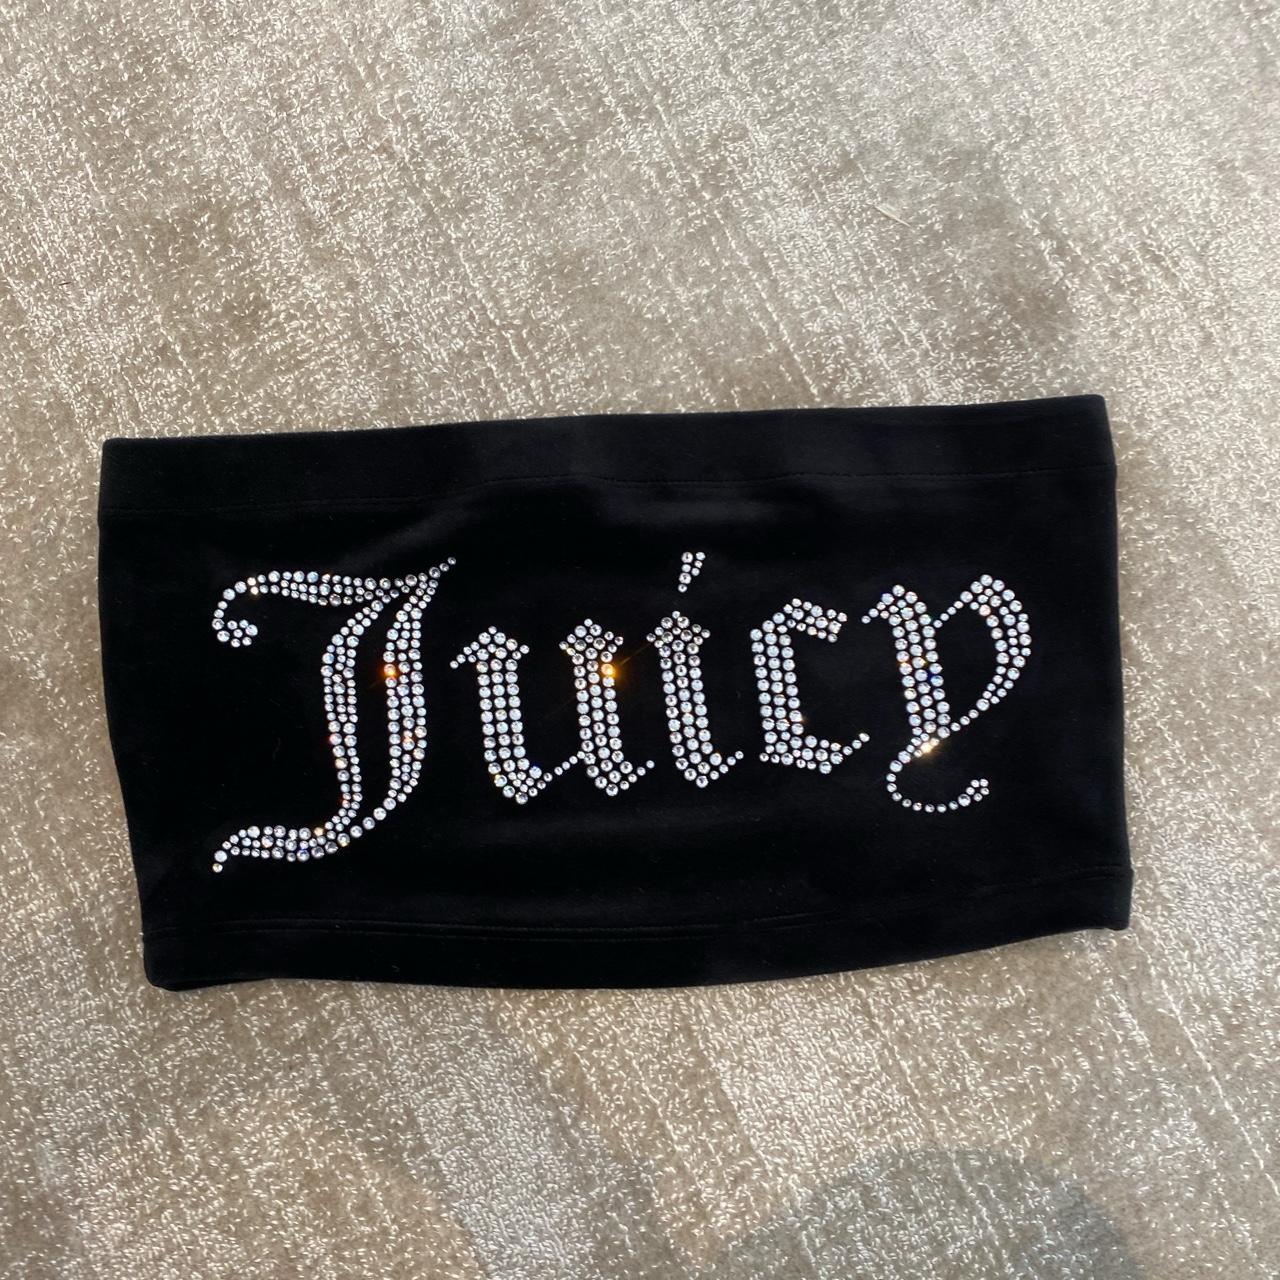 Juicy couture boob tube, barley worn, great condition - Depop